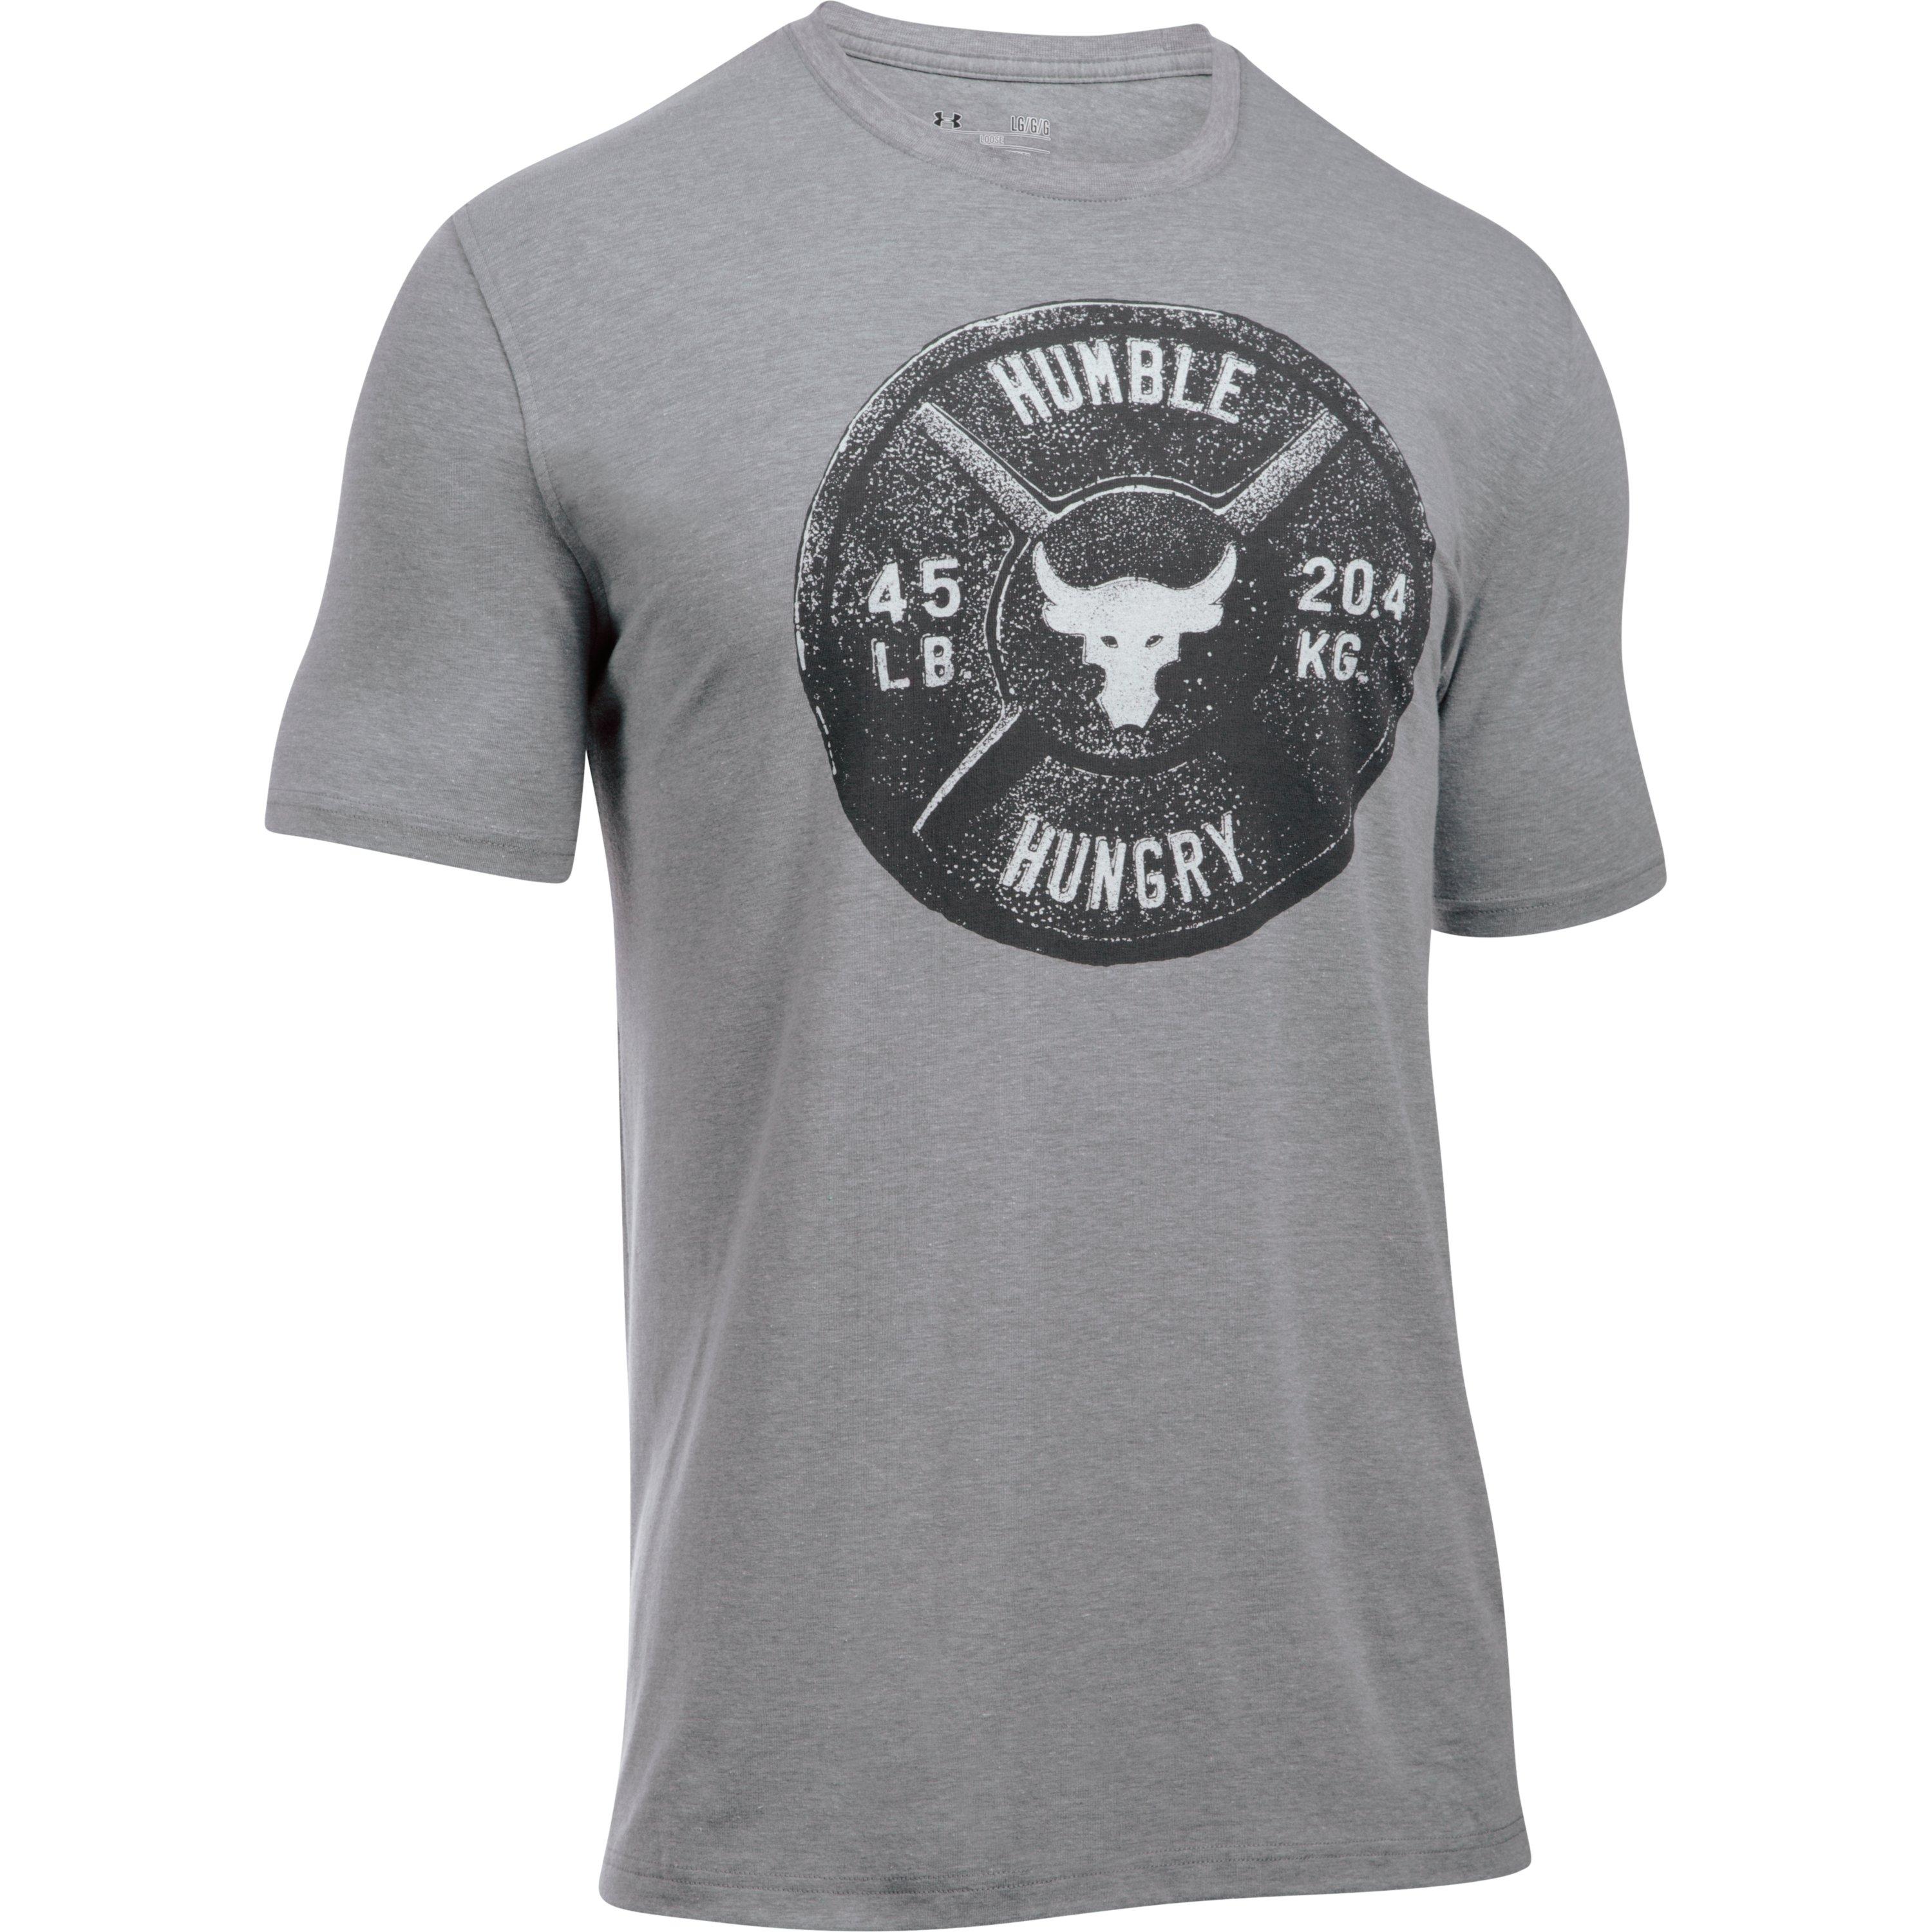 Under Armour Project Rock Show Your Family T-Shirt